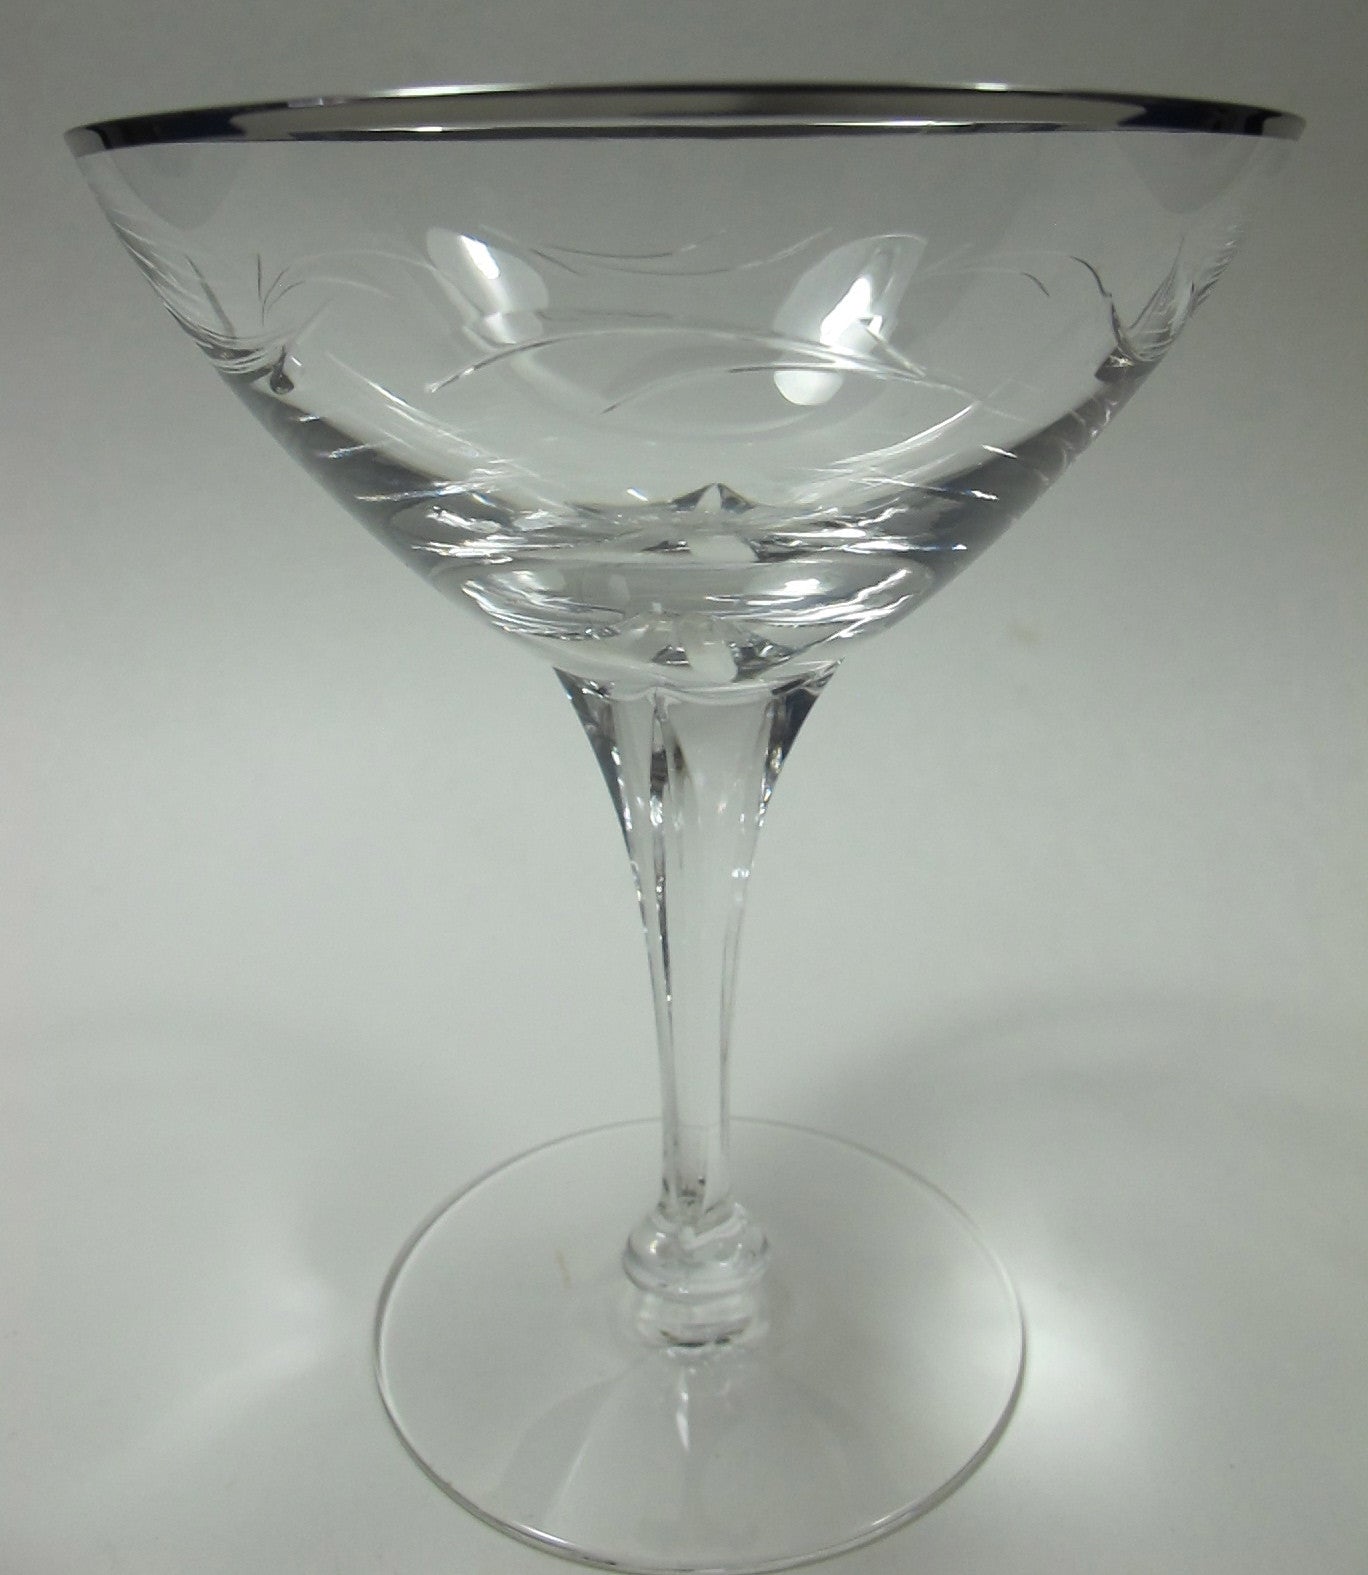 Tiffin Riviera Platinum 4 dessert stem cut glass, Crystal  Made in USA Ohio 1969 - O'Rourke crystal awards & gifts abp cut glass